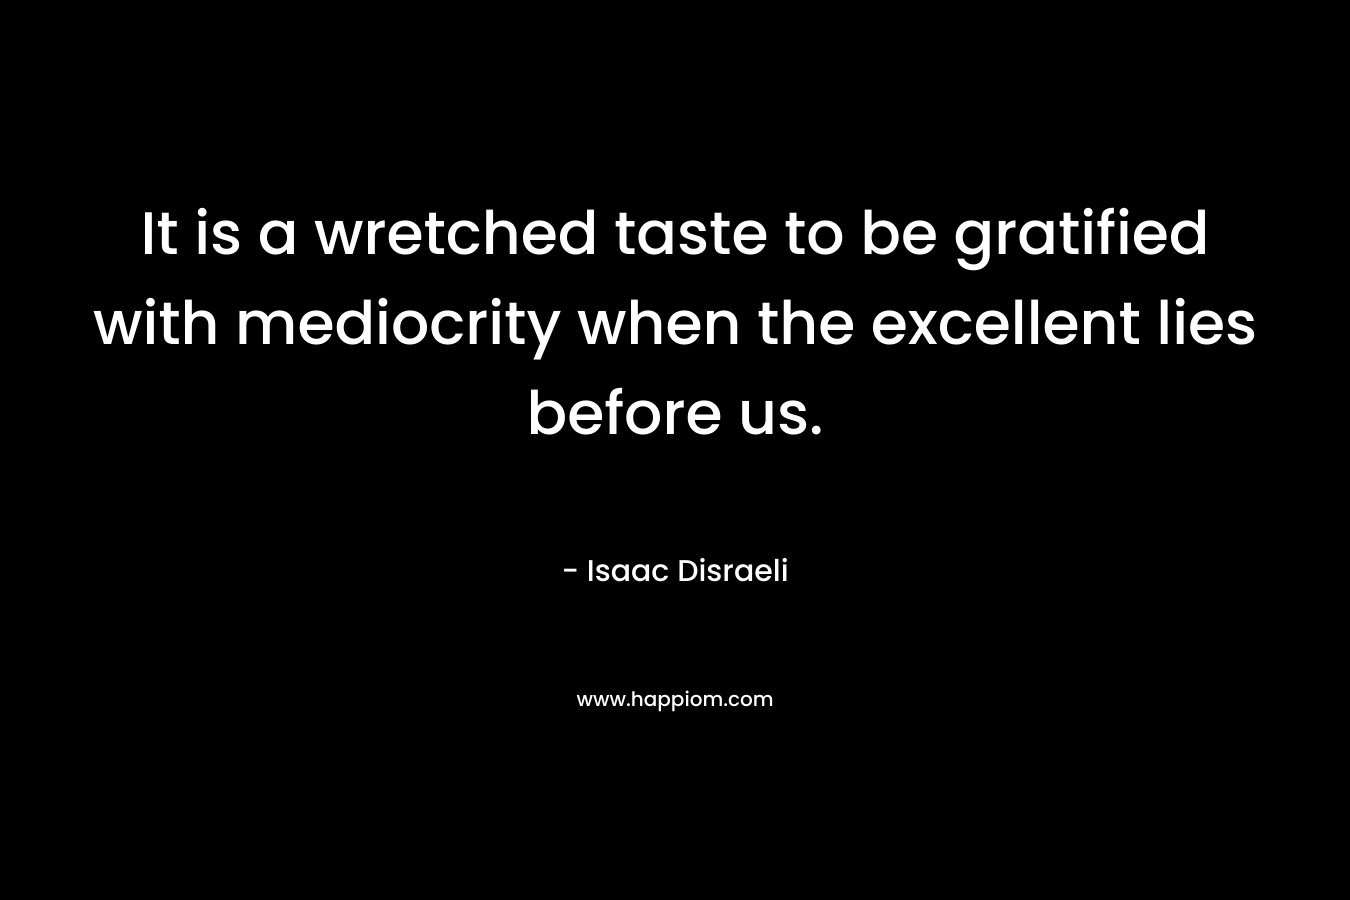 It is a wretched taste to be gratified with mediocrity when the excellent lies before us. – Isaac Disraeli